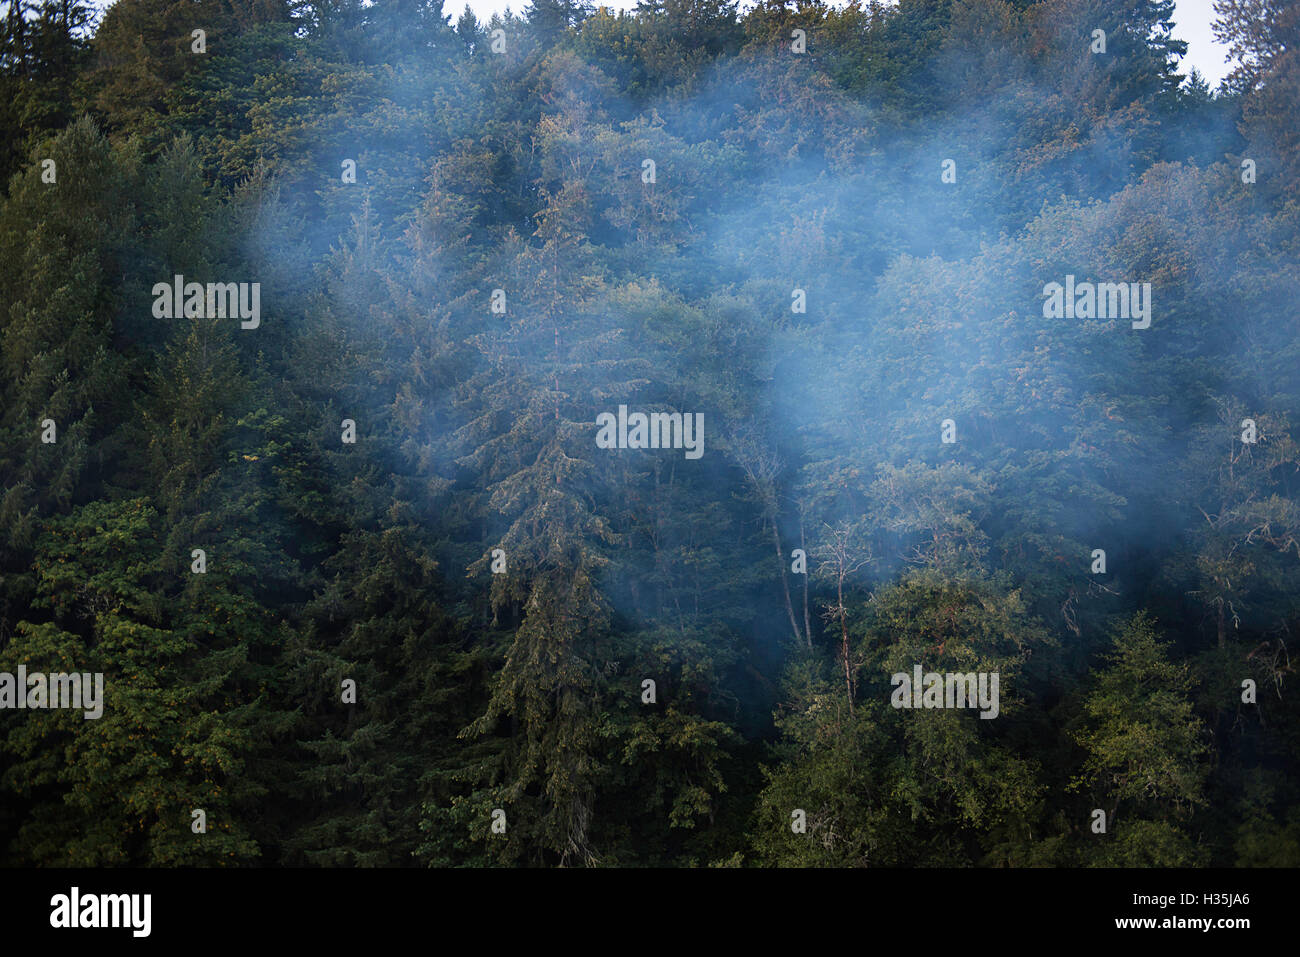 Campfire smoke in a forest. Stock Photo